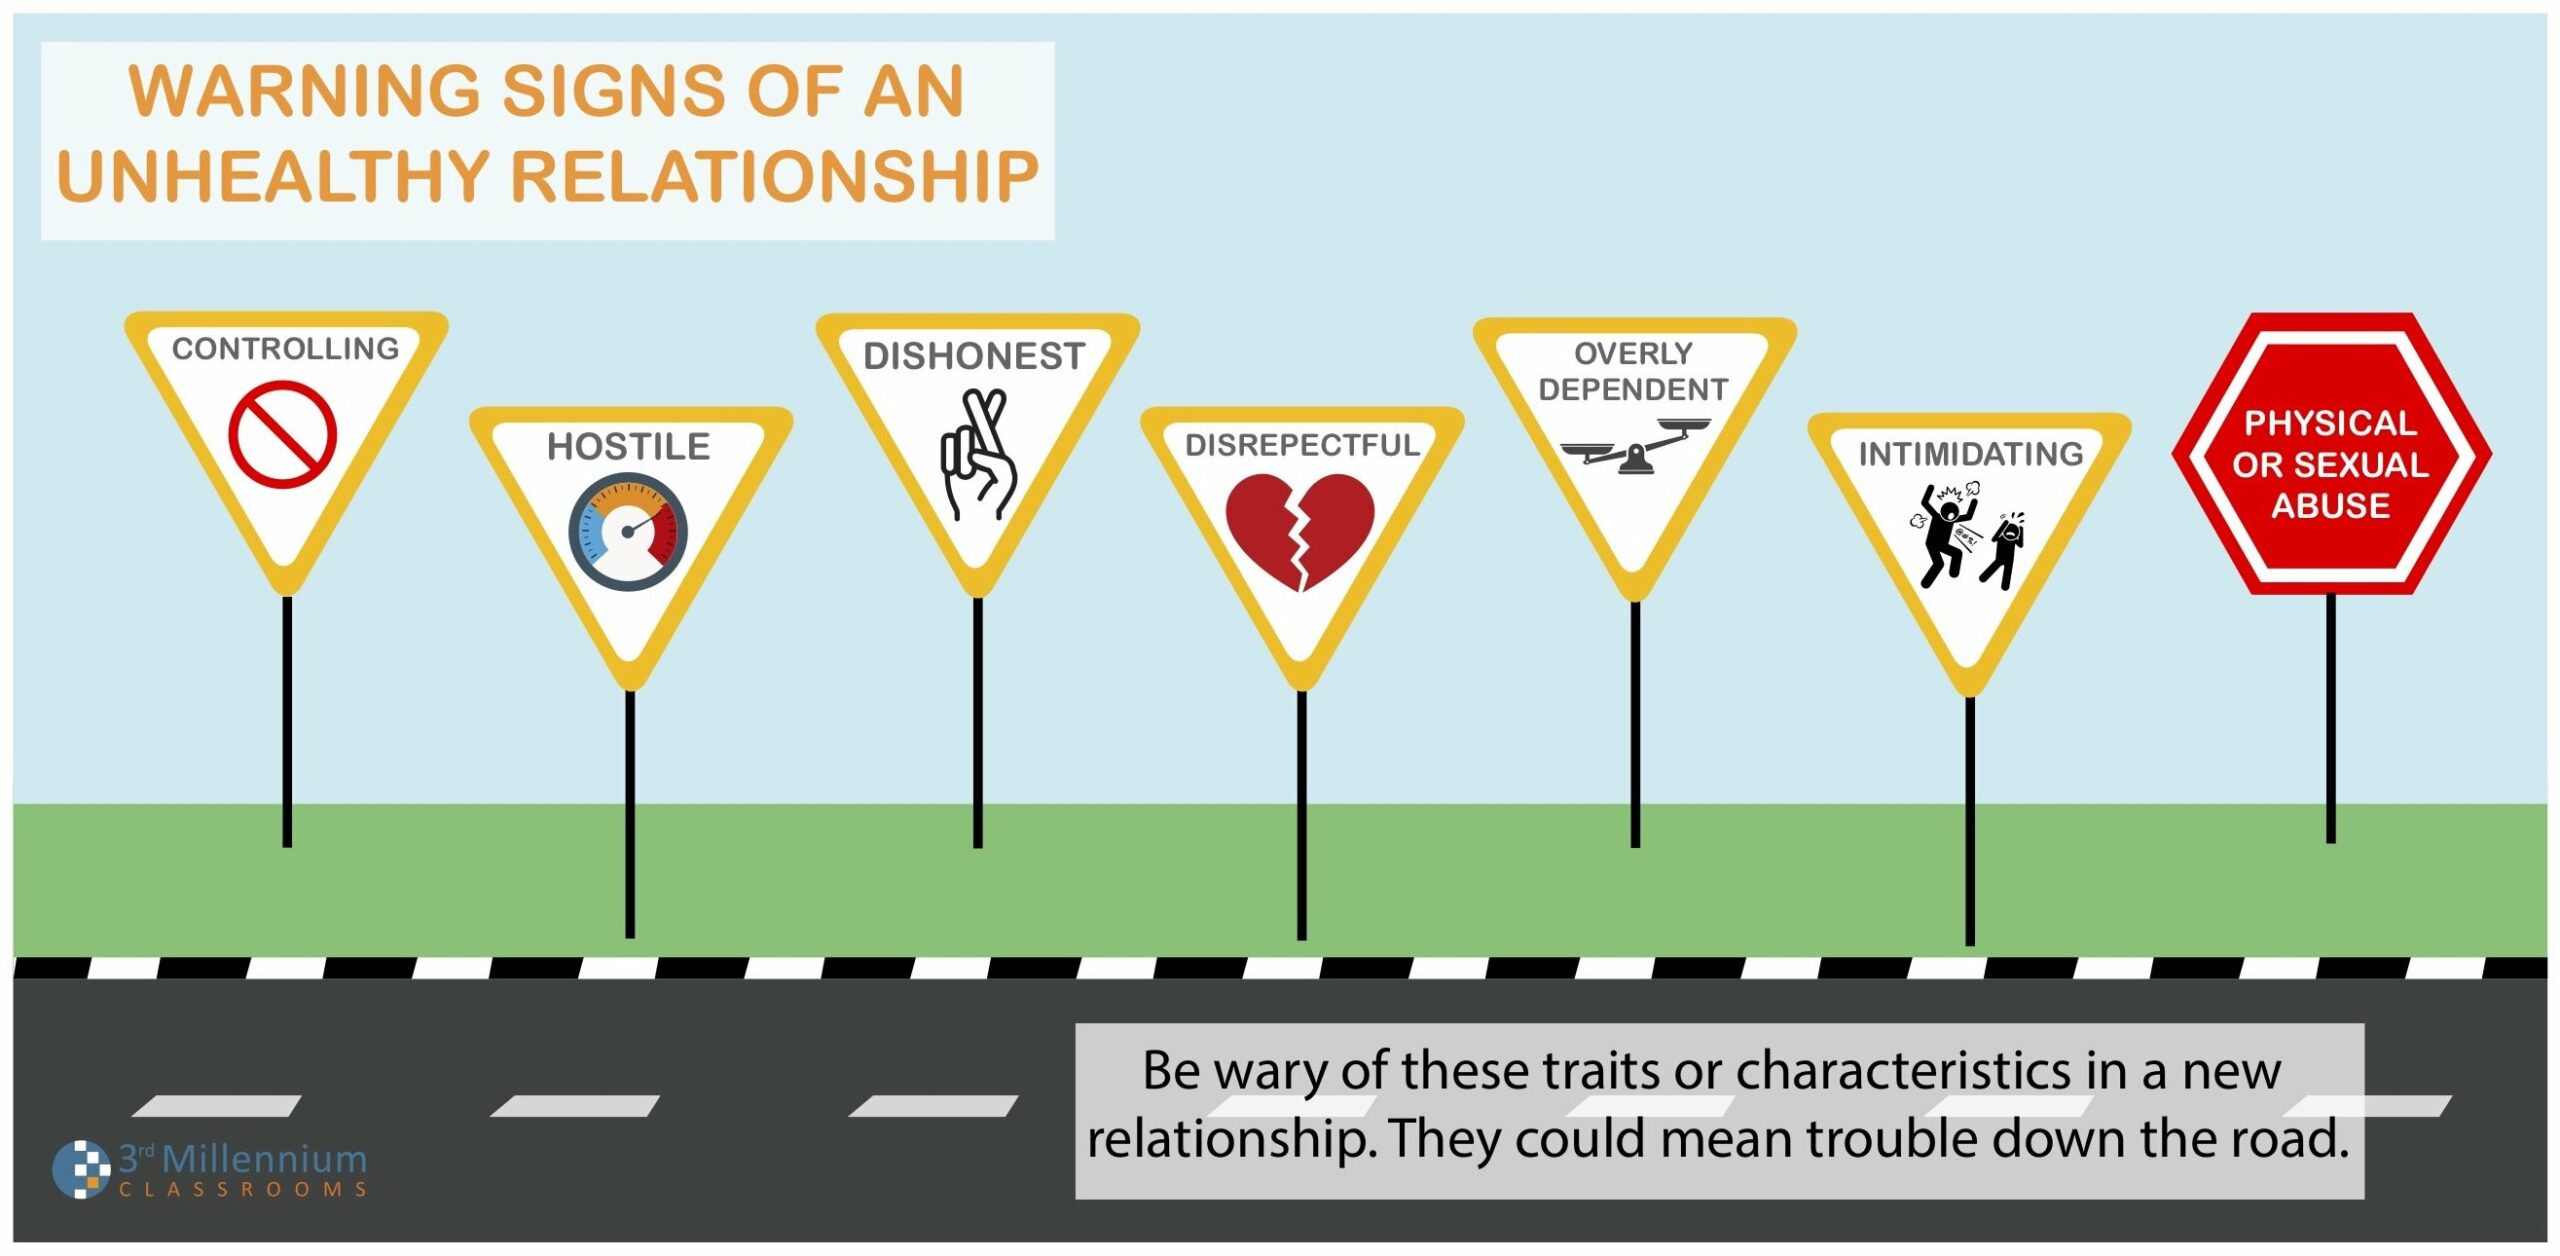 Early warning signs of an unhealthy relationship